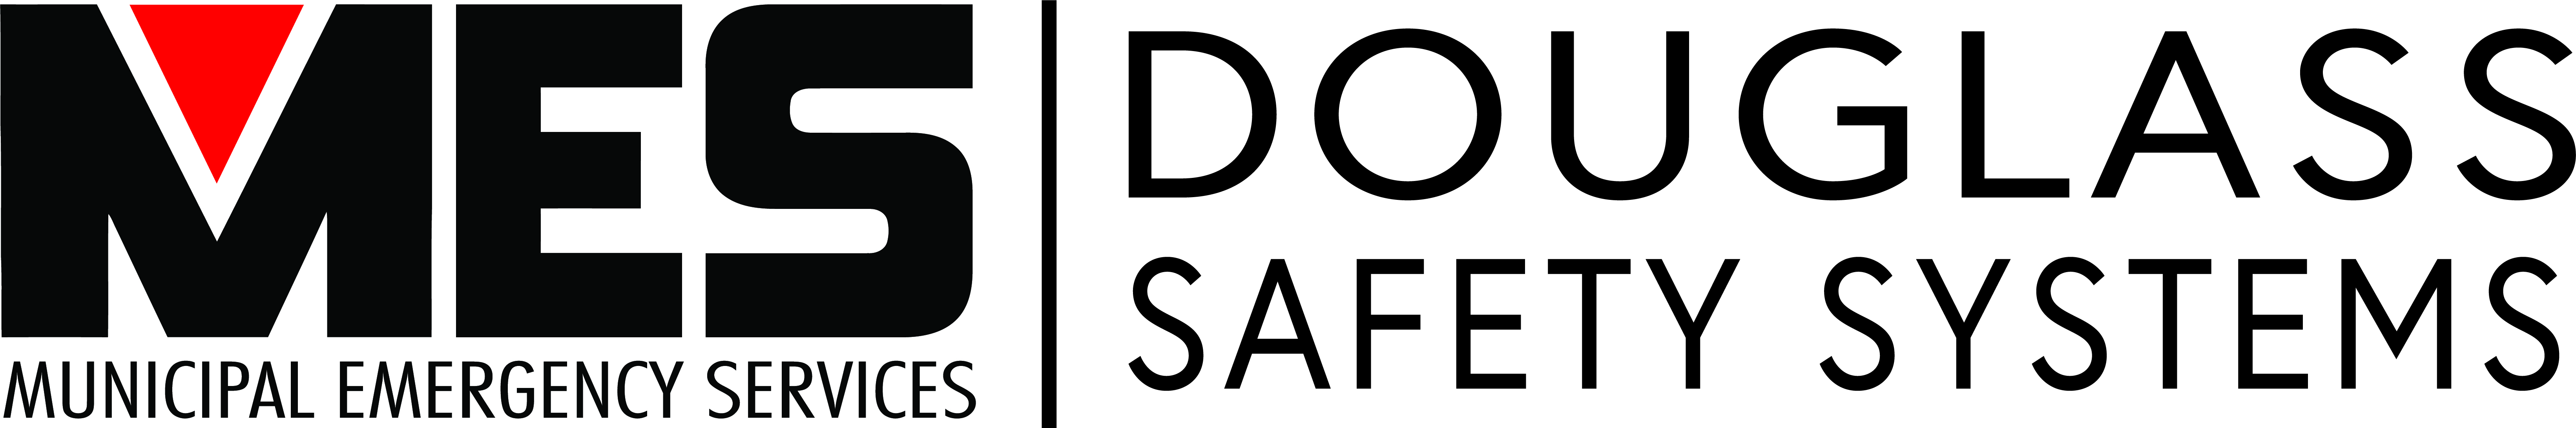 Municipal Emergency Services, Inc. (MES) Announced Today It Has Acquired Douglass Safety Systems, LLC